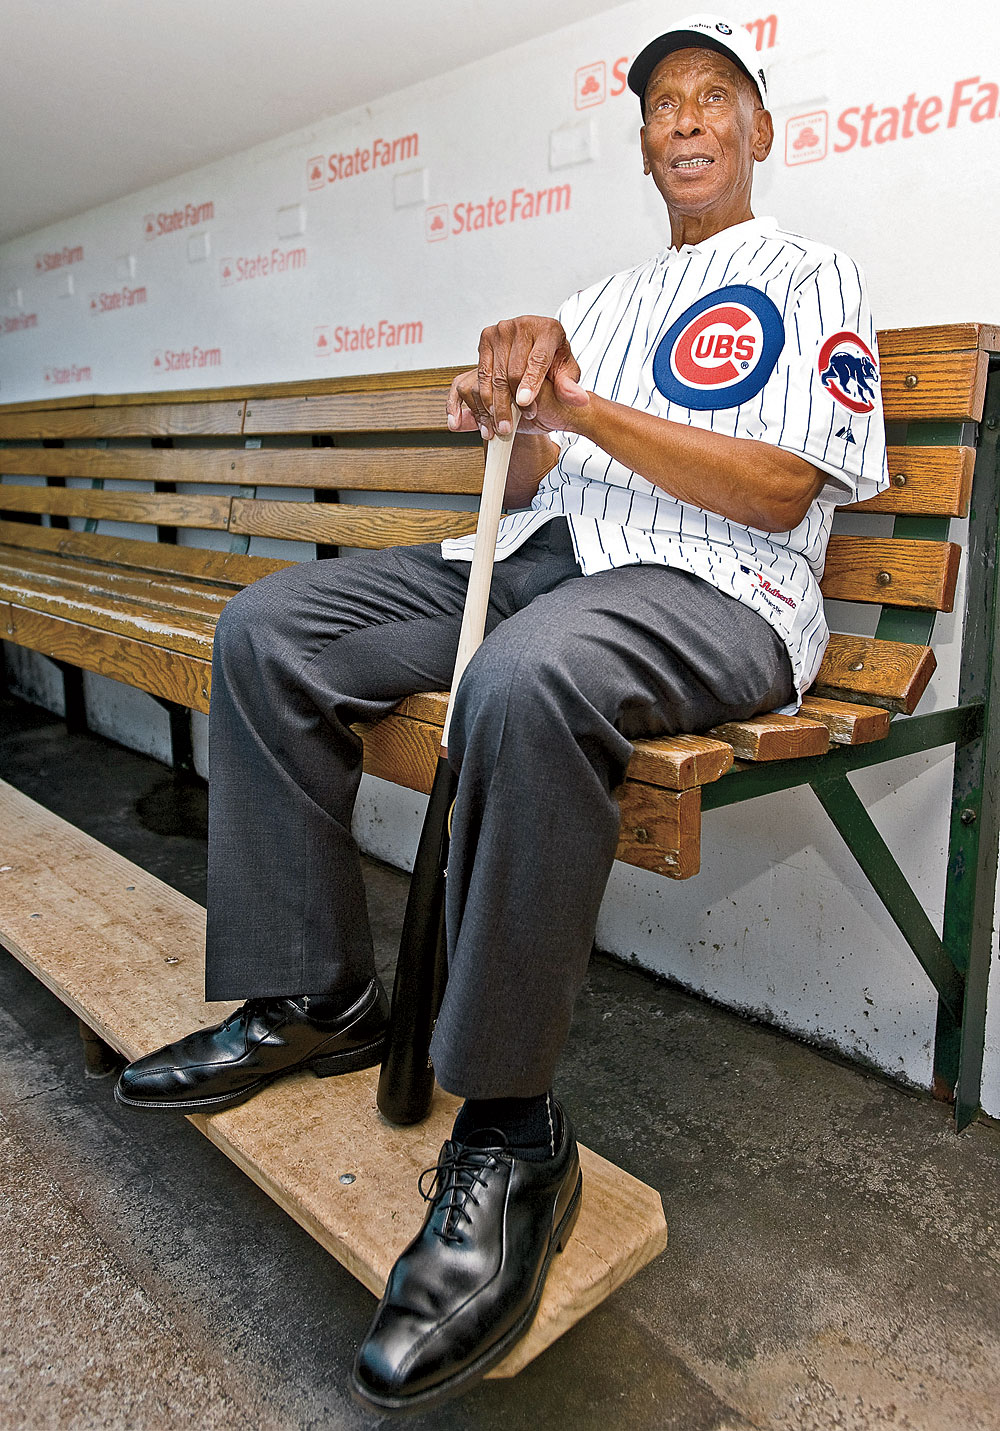 Ernie Banks had dementia when he signed will, says ex-wife